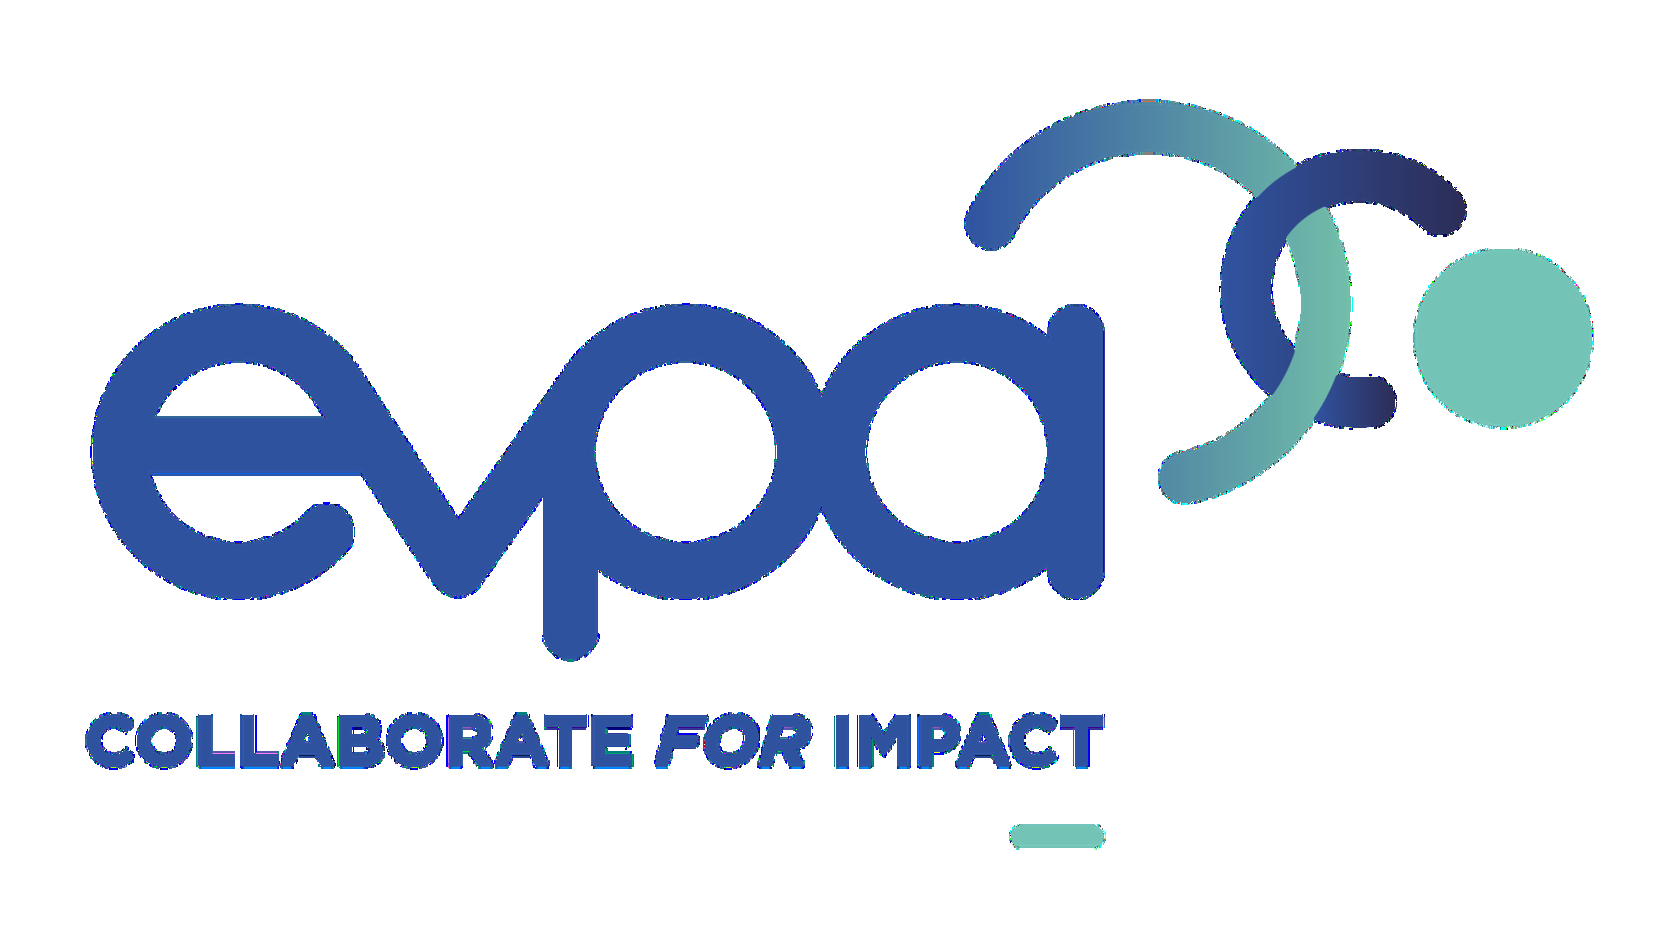 Collaborate for Impact